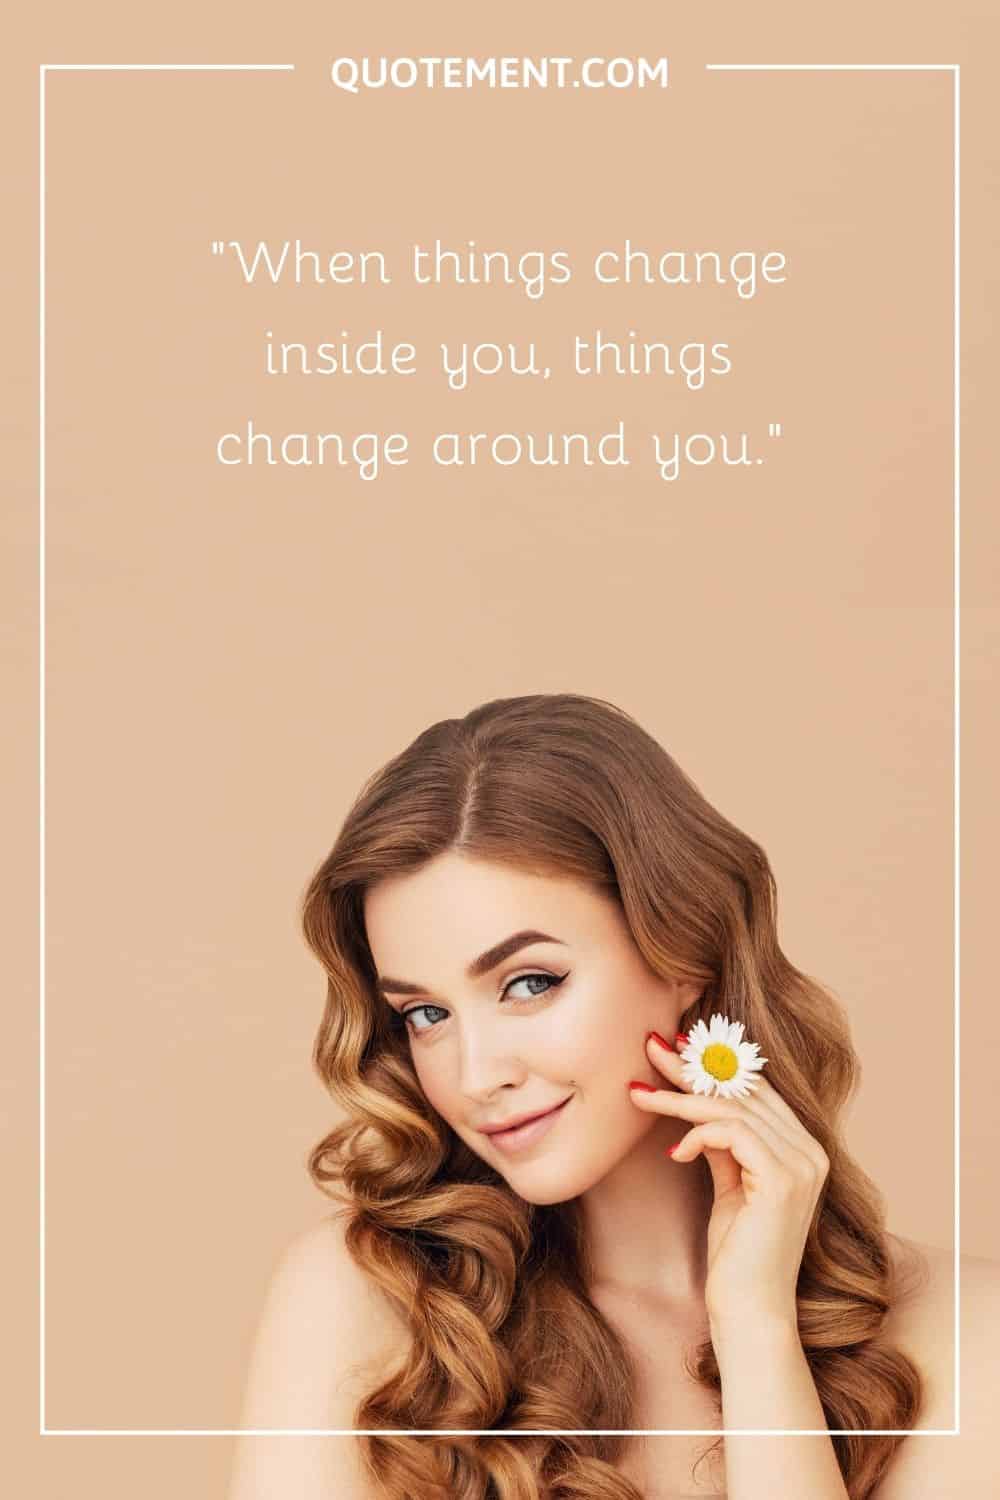 When things change inside you, things change around you.